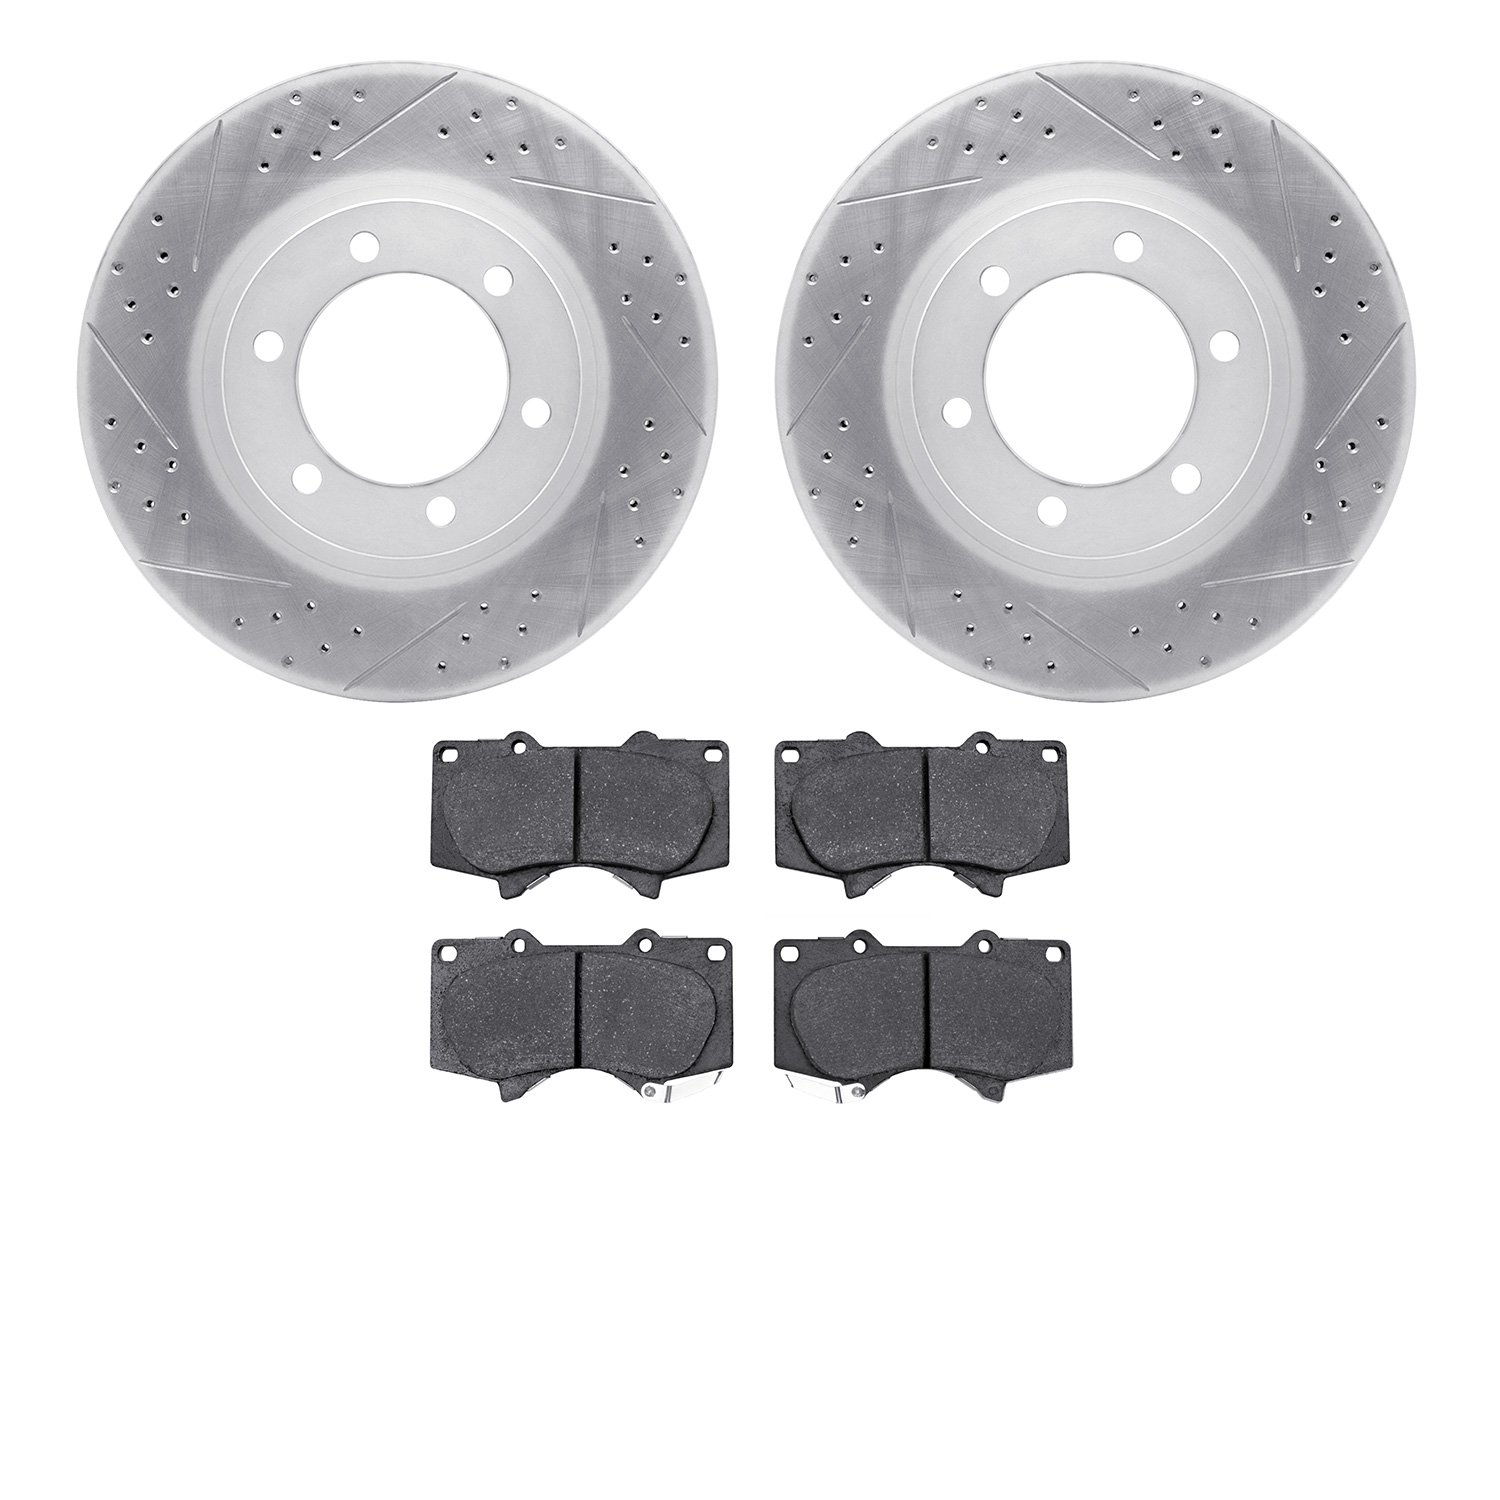 2502-76146 Geoperformance Drilled/Slotted Rotors w/5000 Advanced Brake Pads Kit, 2003-2009 Lexus/Toyota/Scion, Position: Front